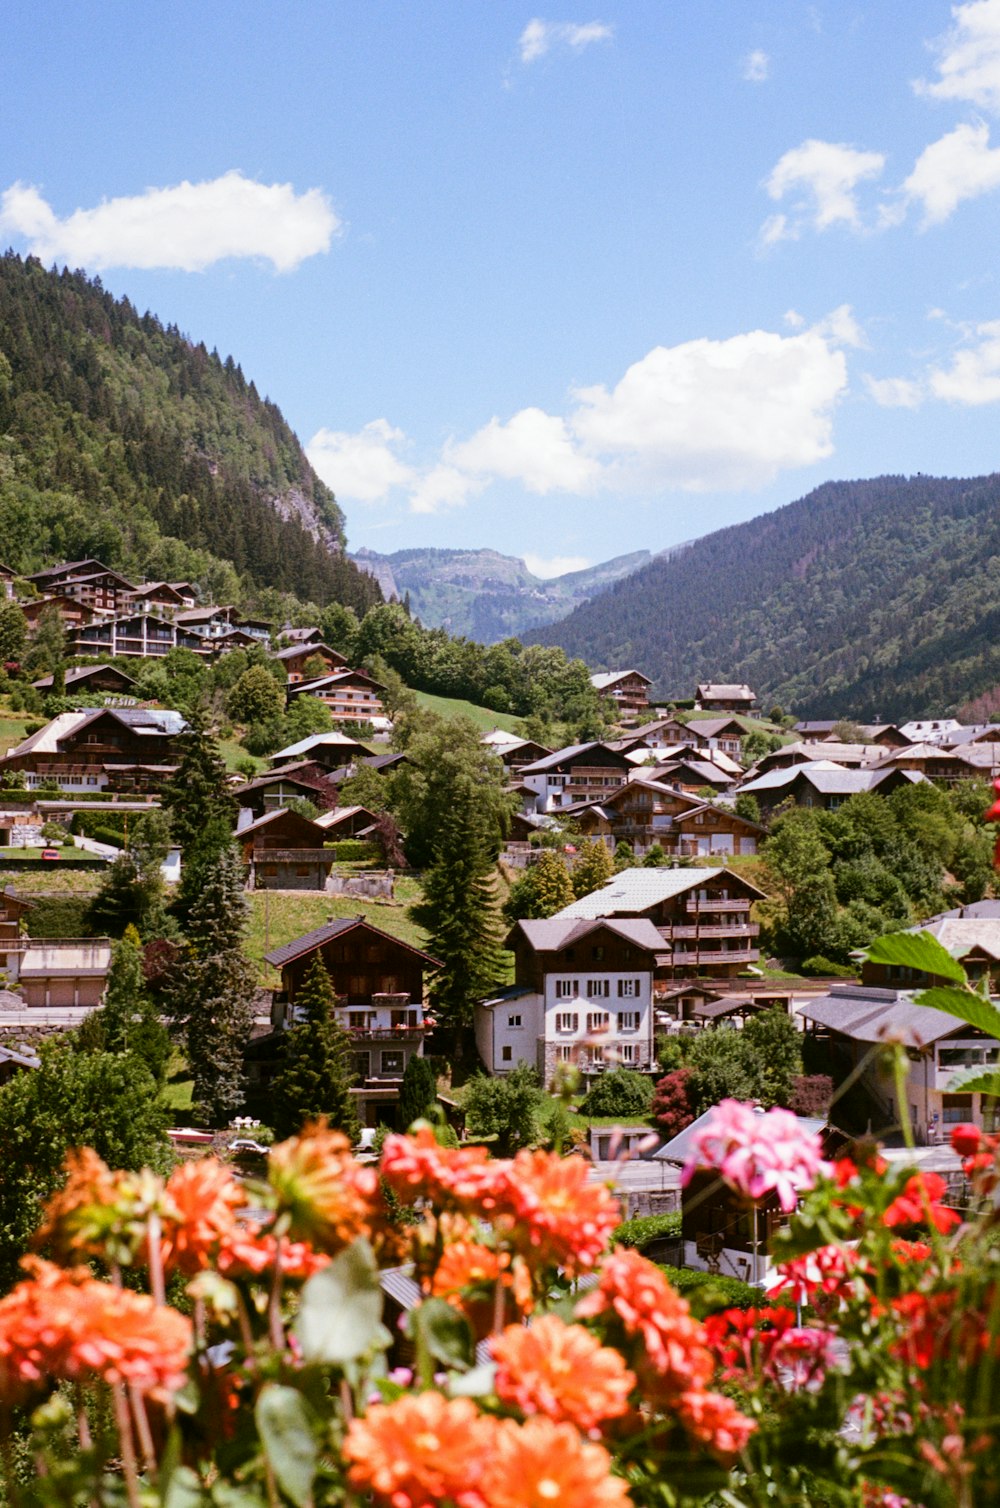 a view of a village in the mountains with flowers in the foreground